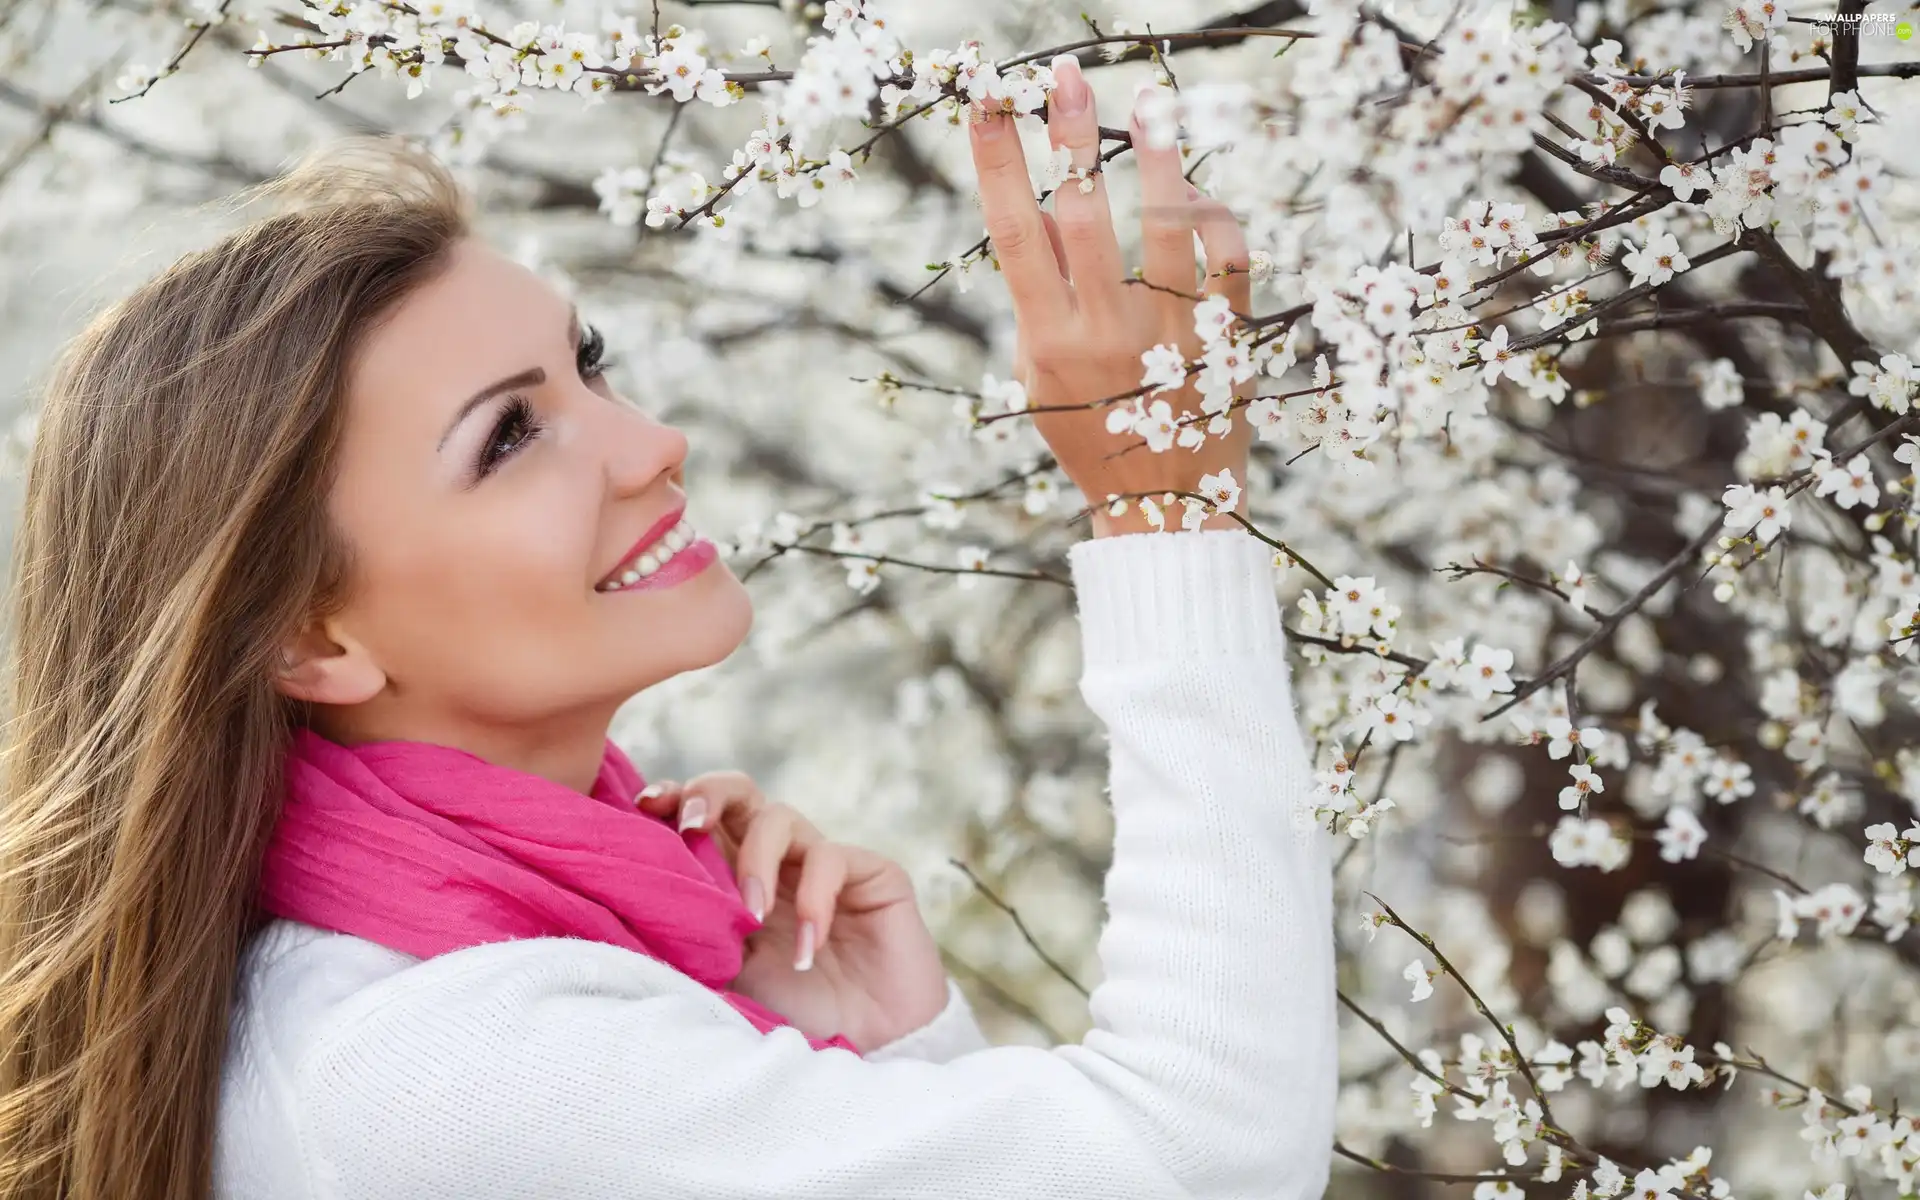 Pink, smiling, Flourished, Twigs, Scarf, Women